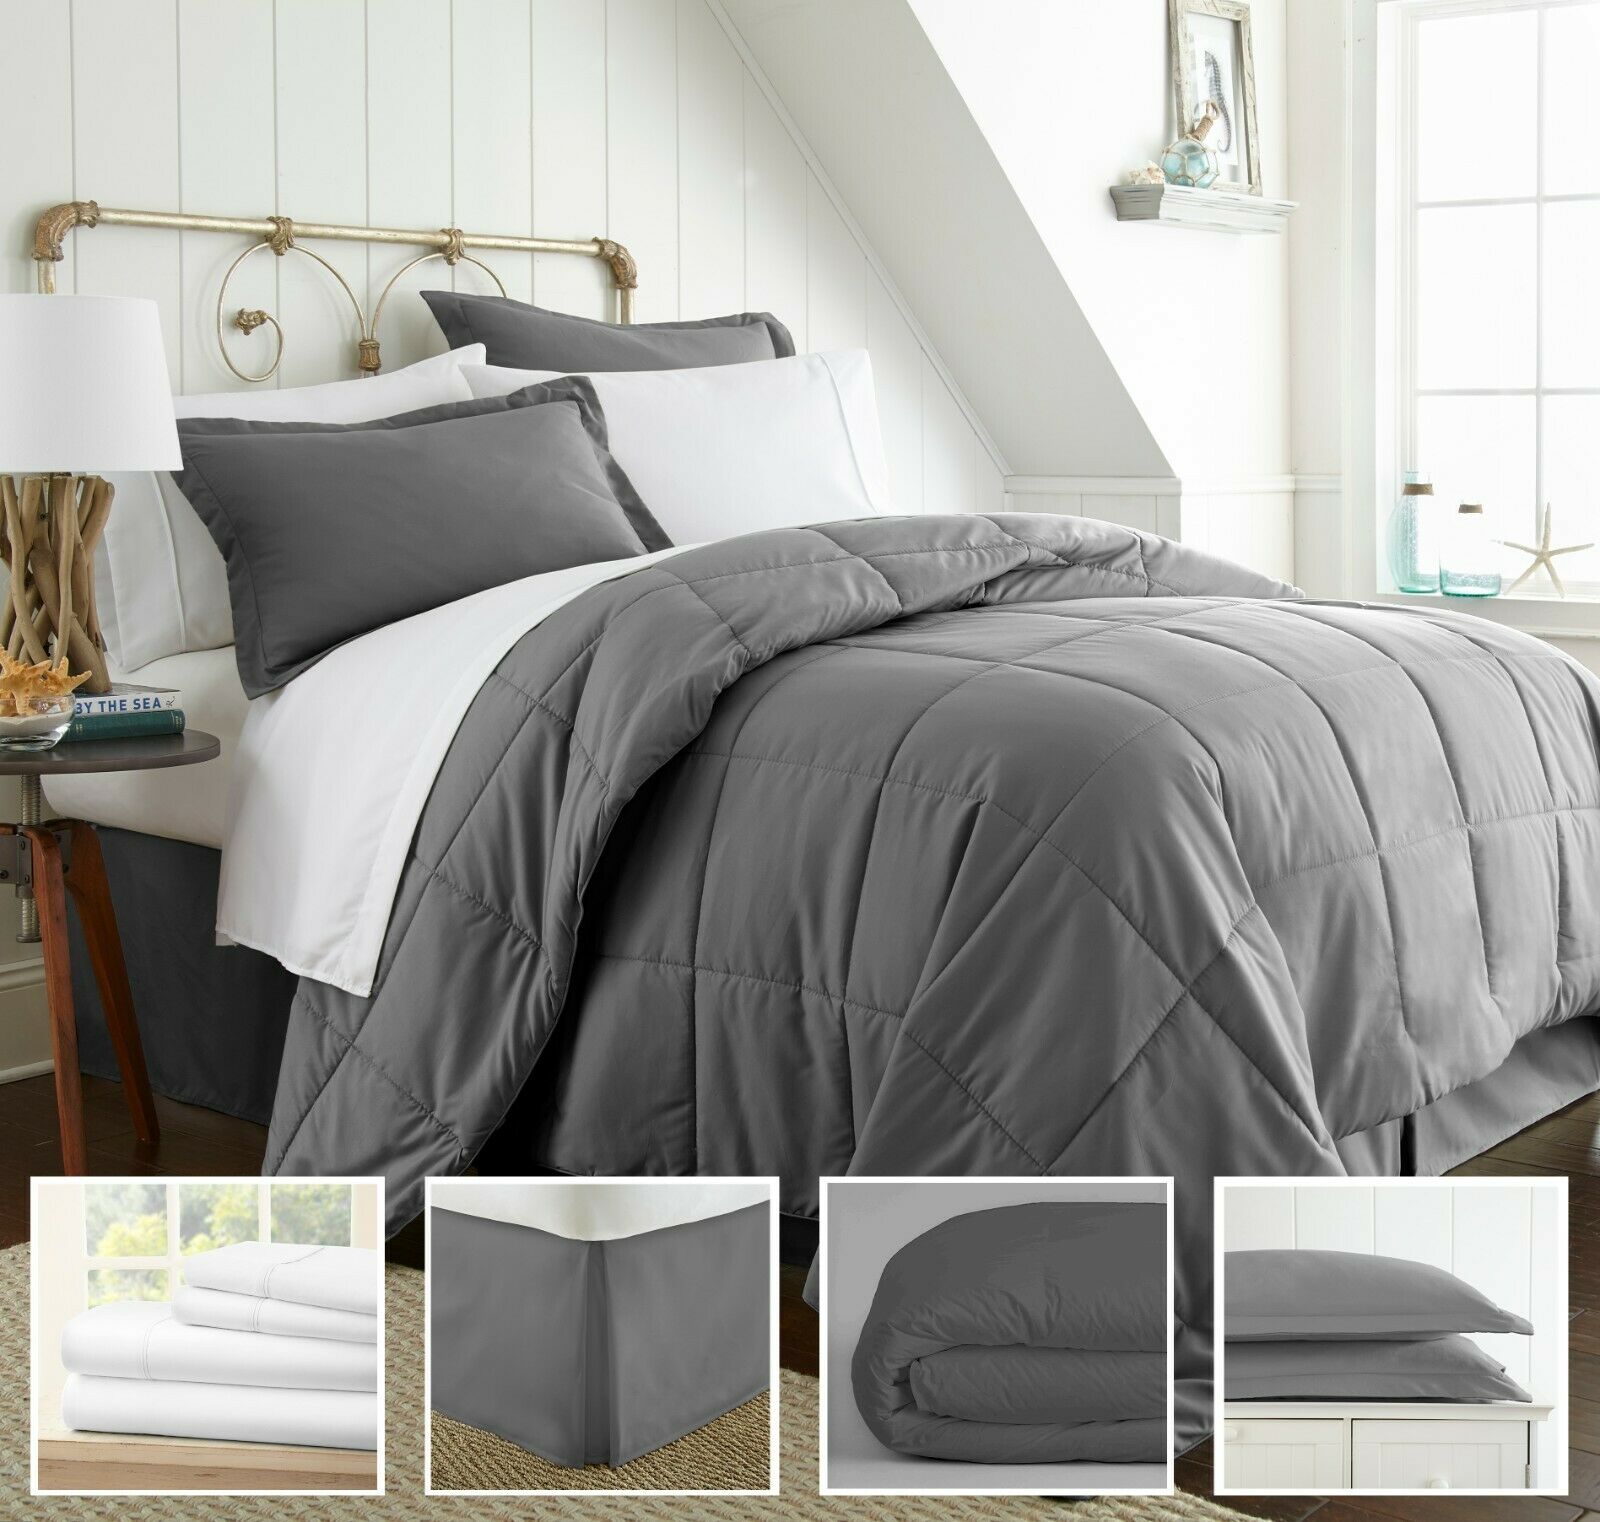 Ultra Soft Entire 8 Piece Bed in a Bag by The Home Collection - Hypoallergenic